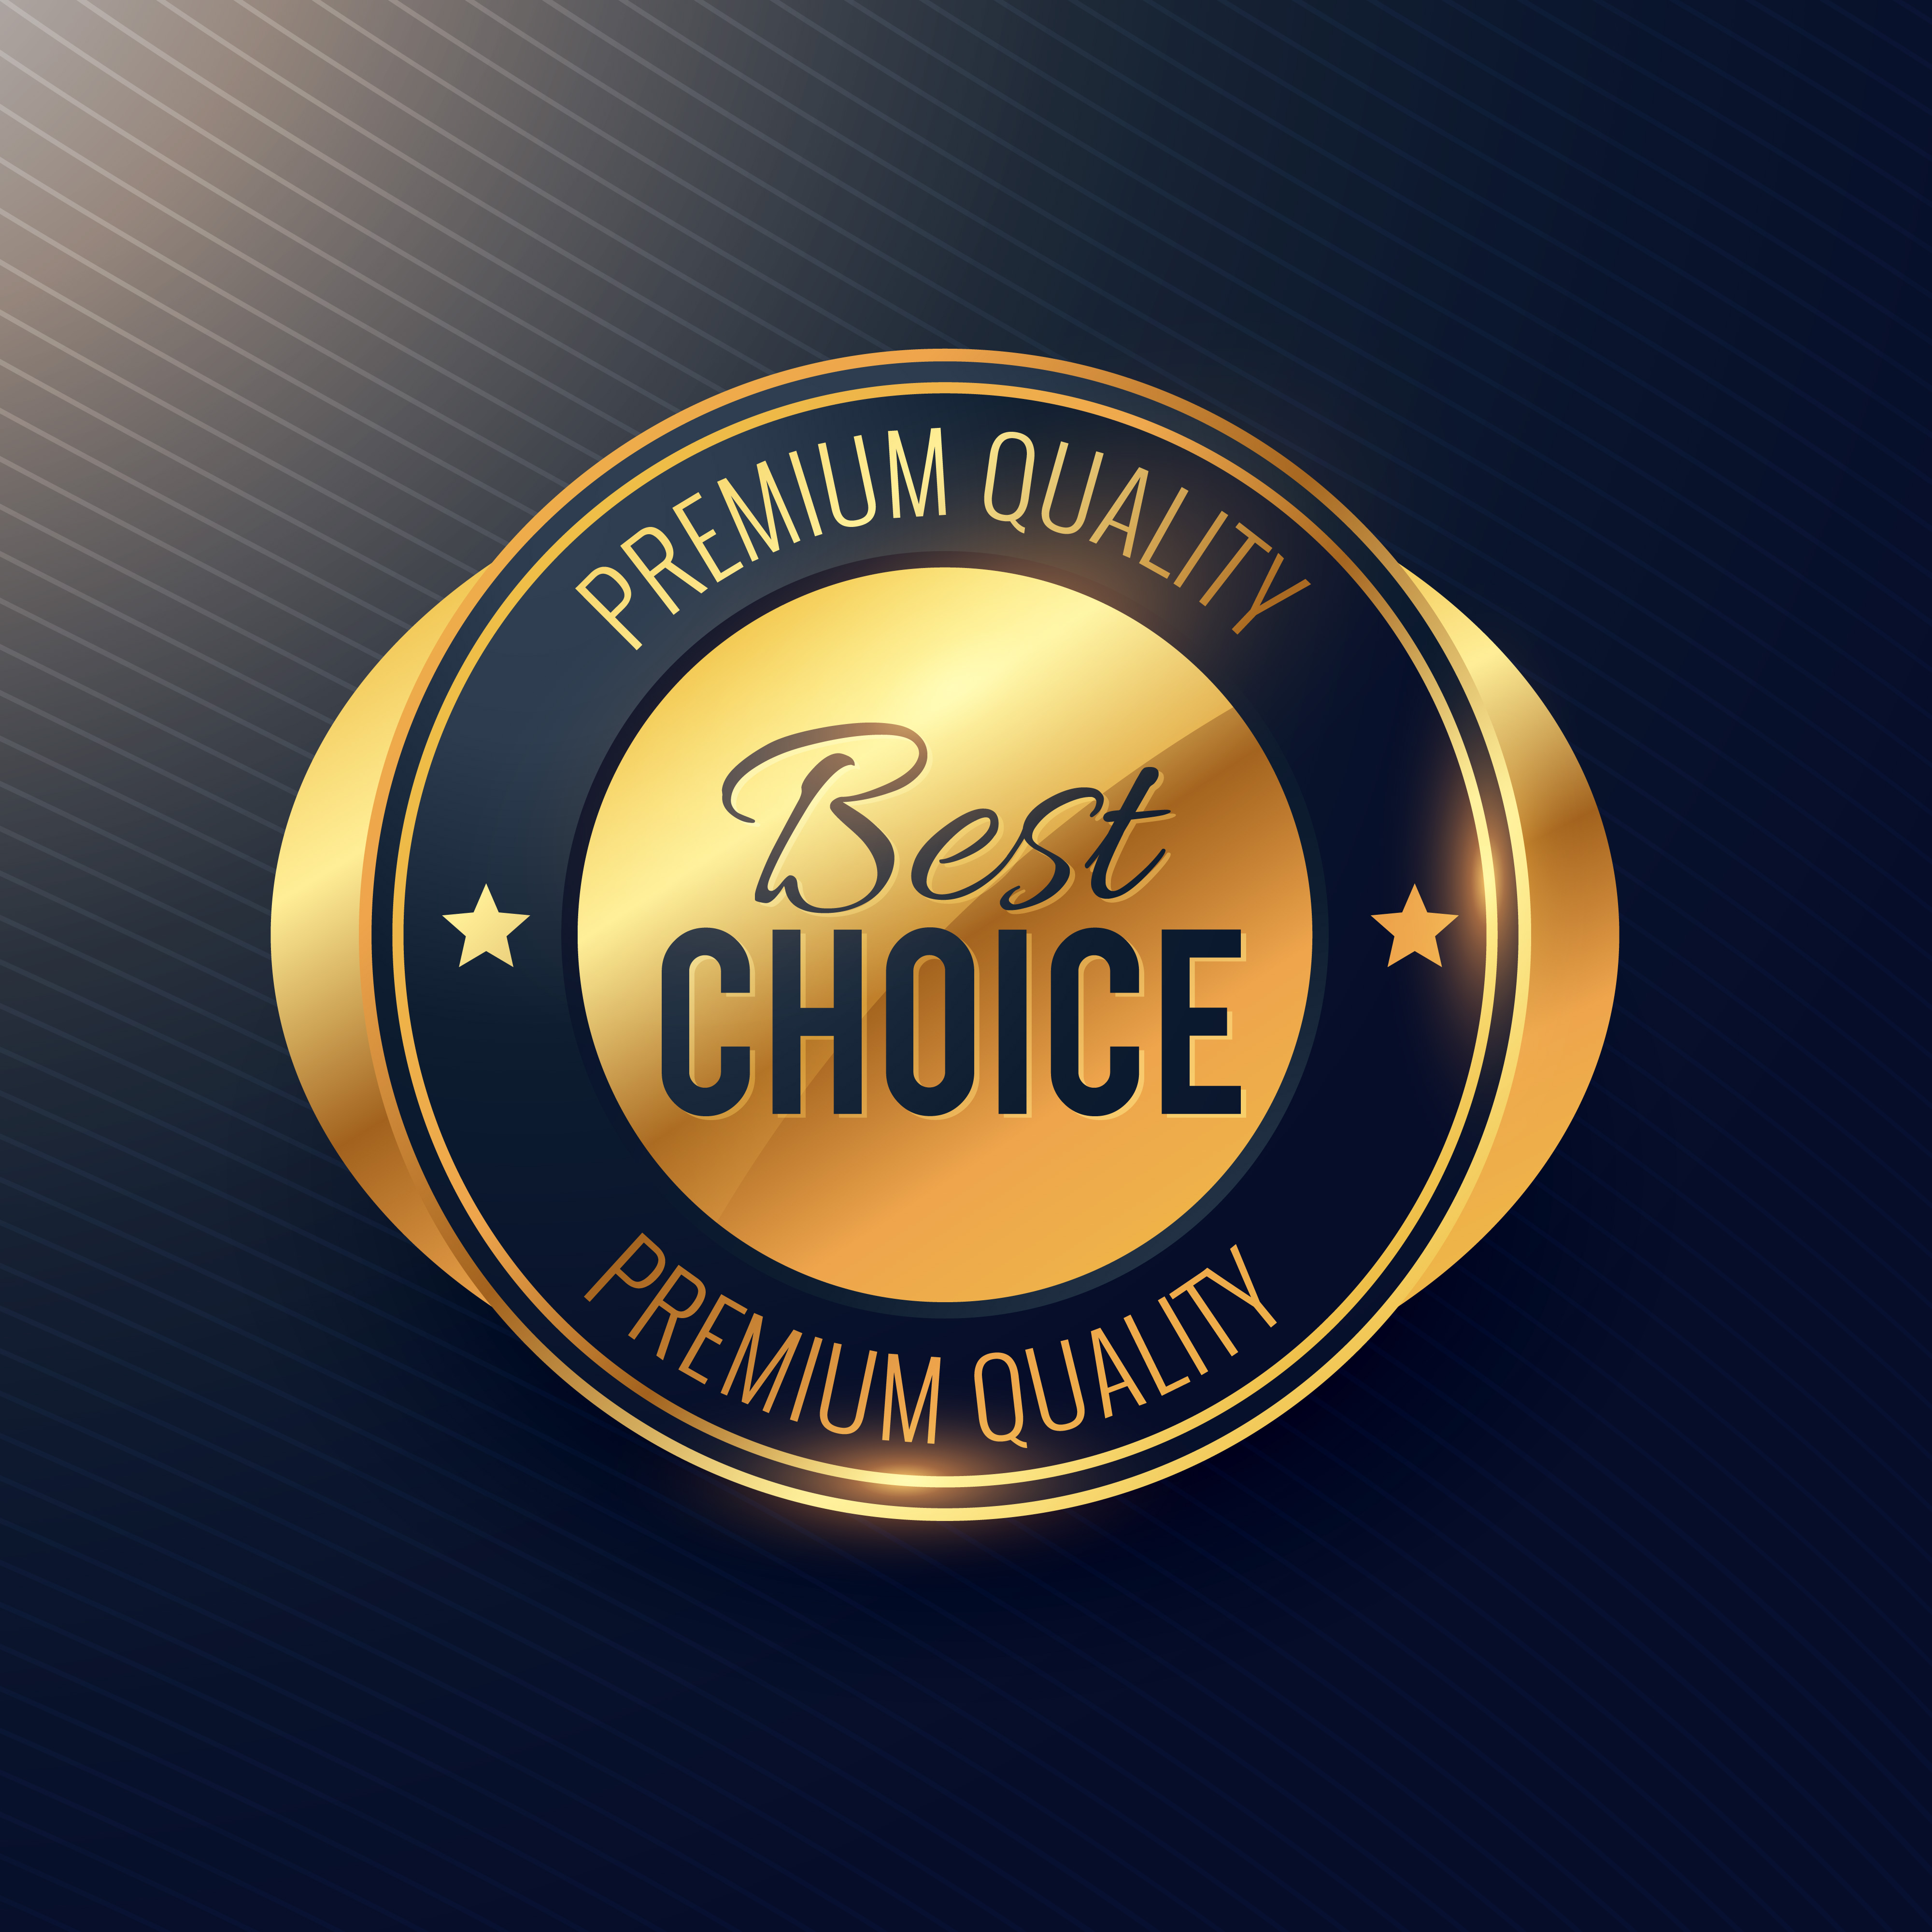 Best Choice Golden Label And Badge Design For Premium Quality